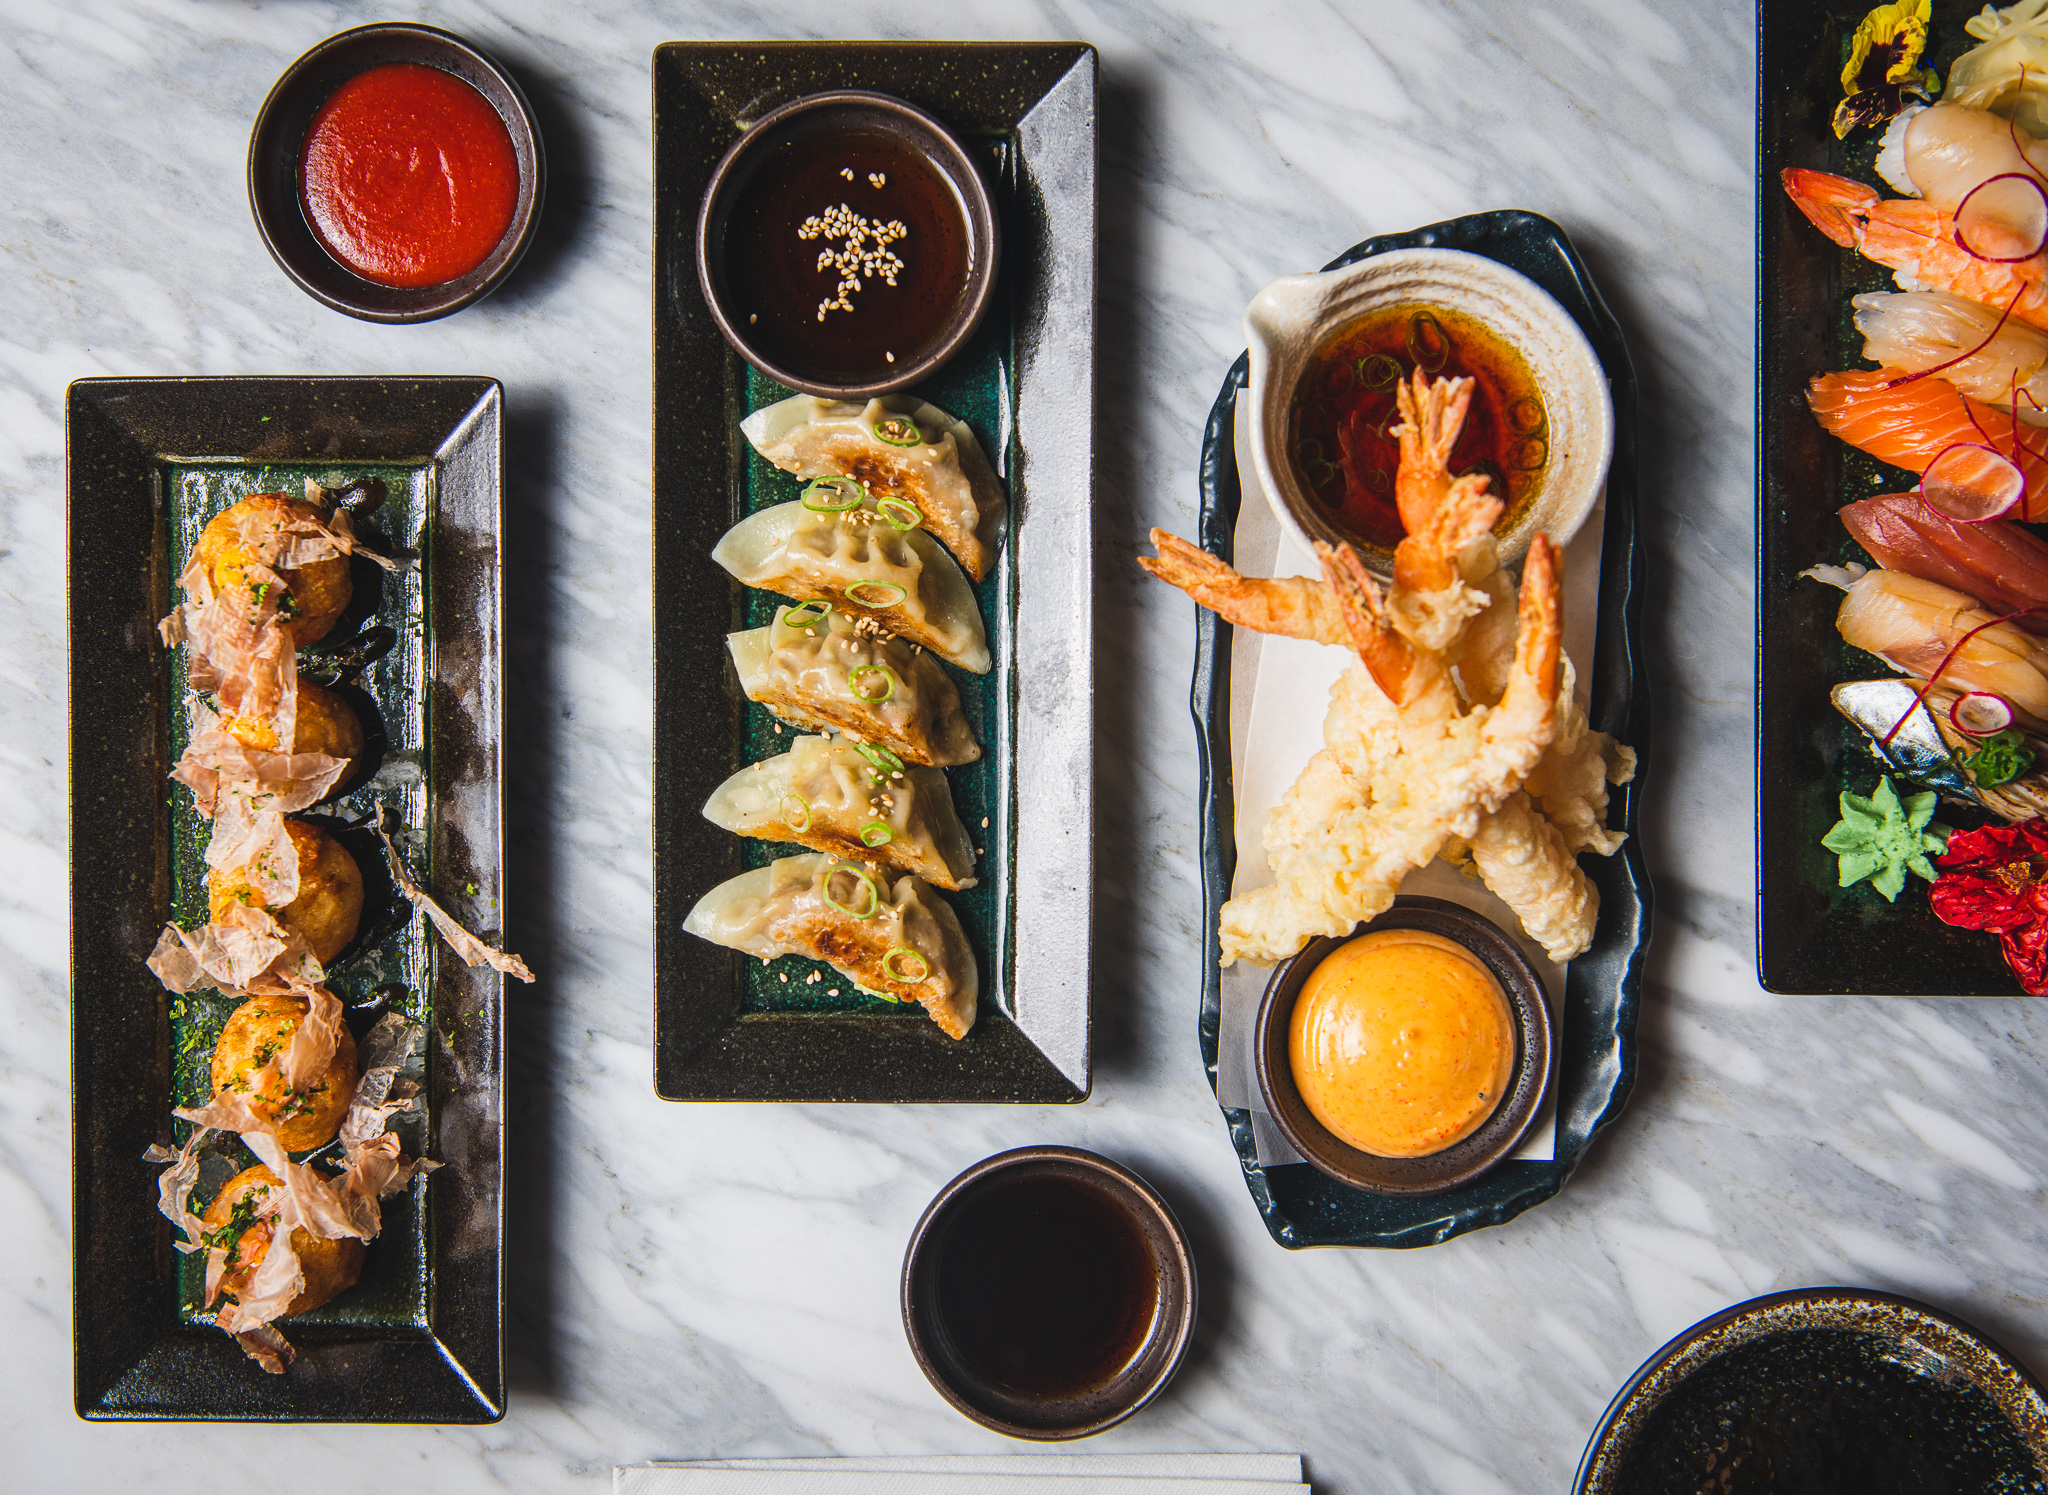 KIBOU Solihull – 15% off Lunch